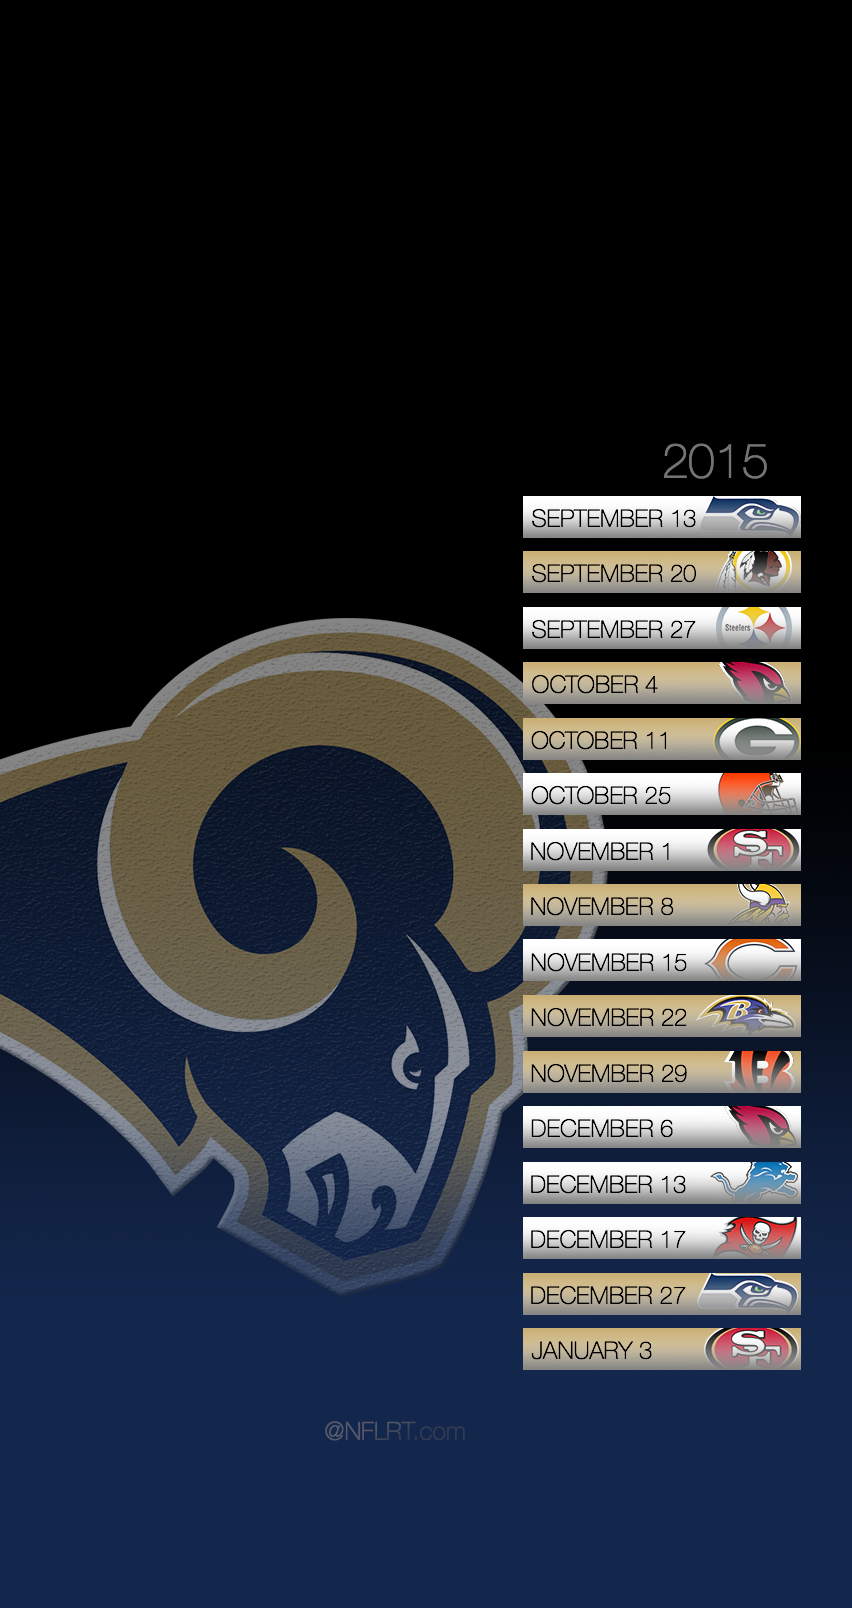 West Division Nfl Football Team The Arizona Cardnals St Louis Rams